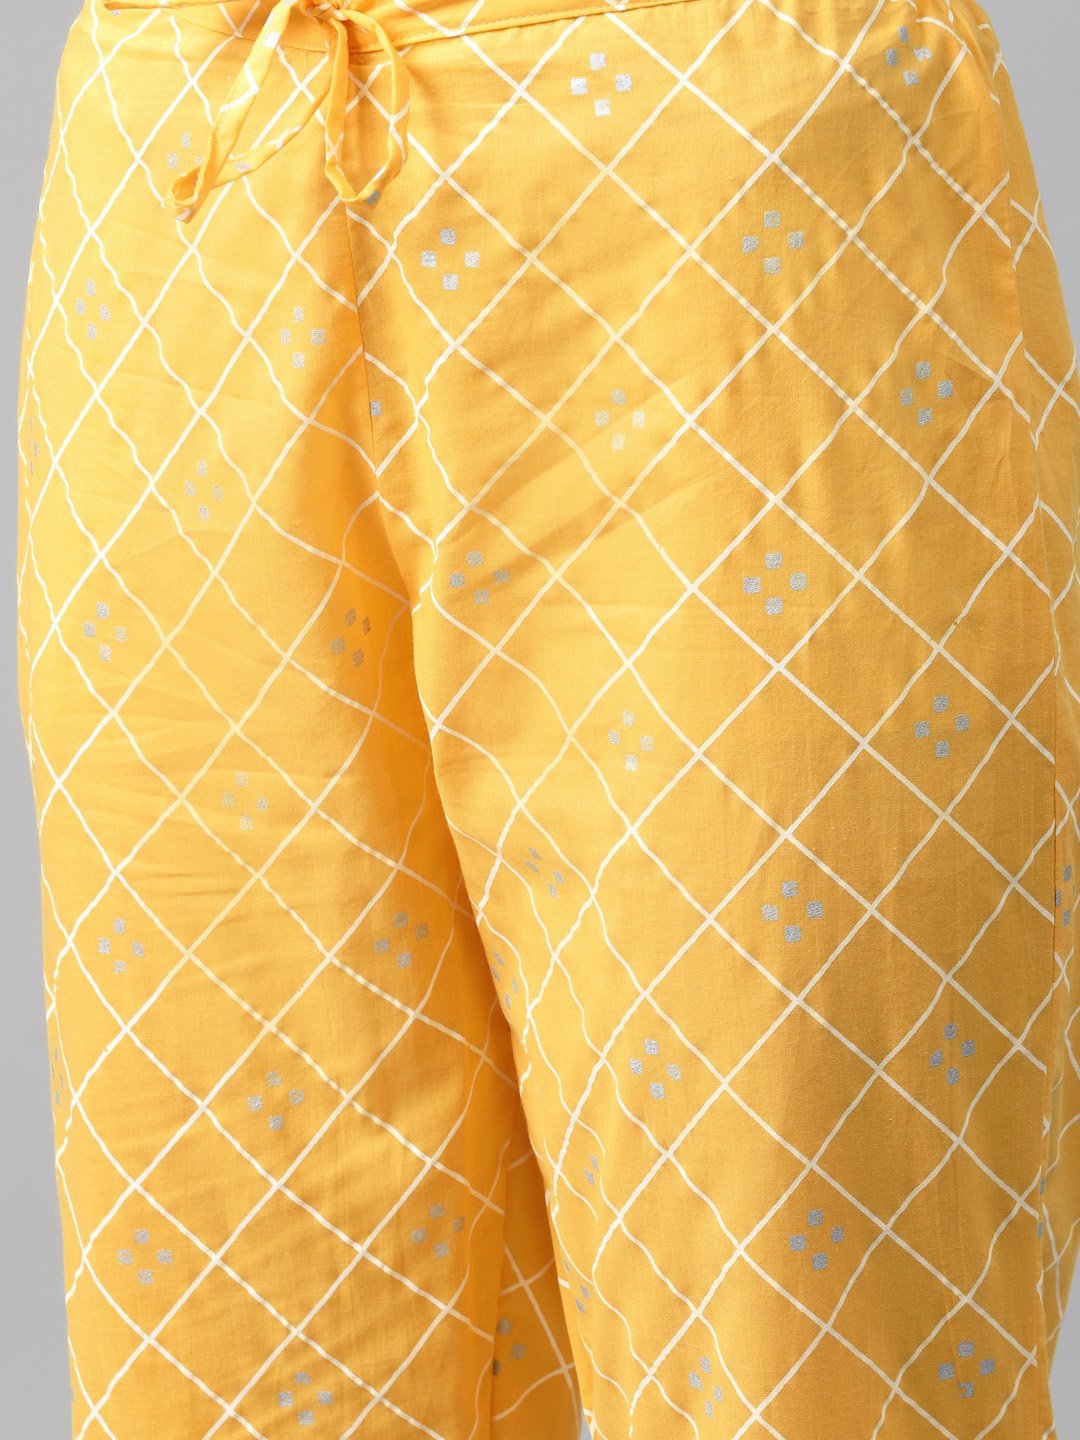 Women Yellow Printed Suit Set by Anubhutee (Set of 3)- Final Clearance Sale